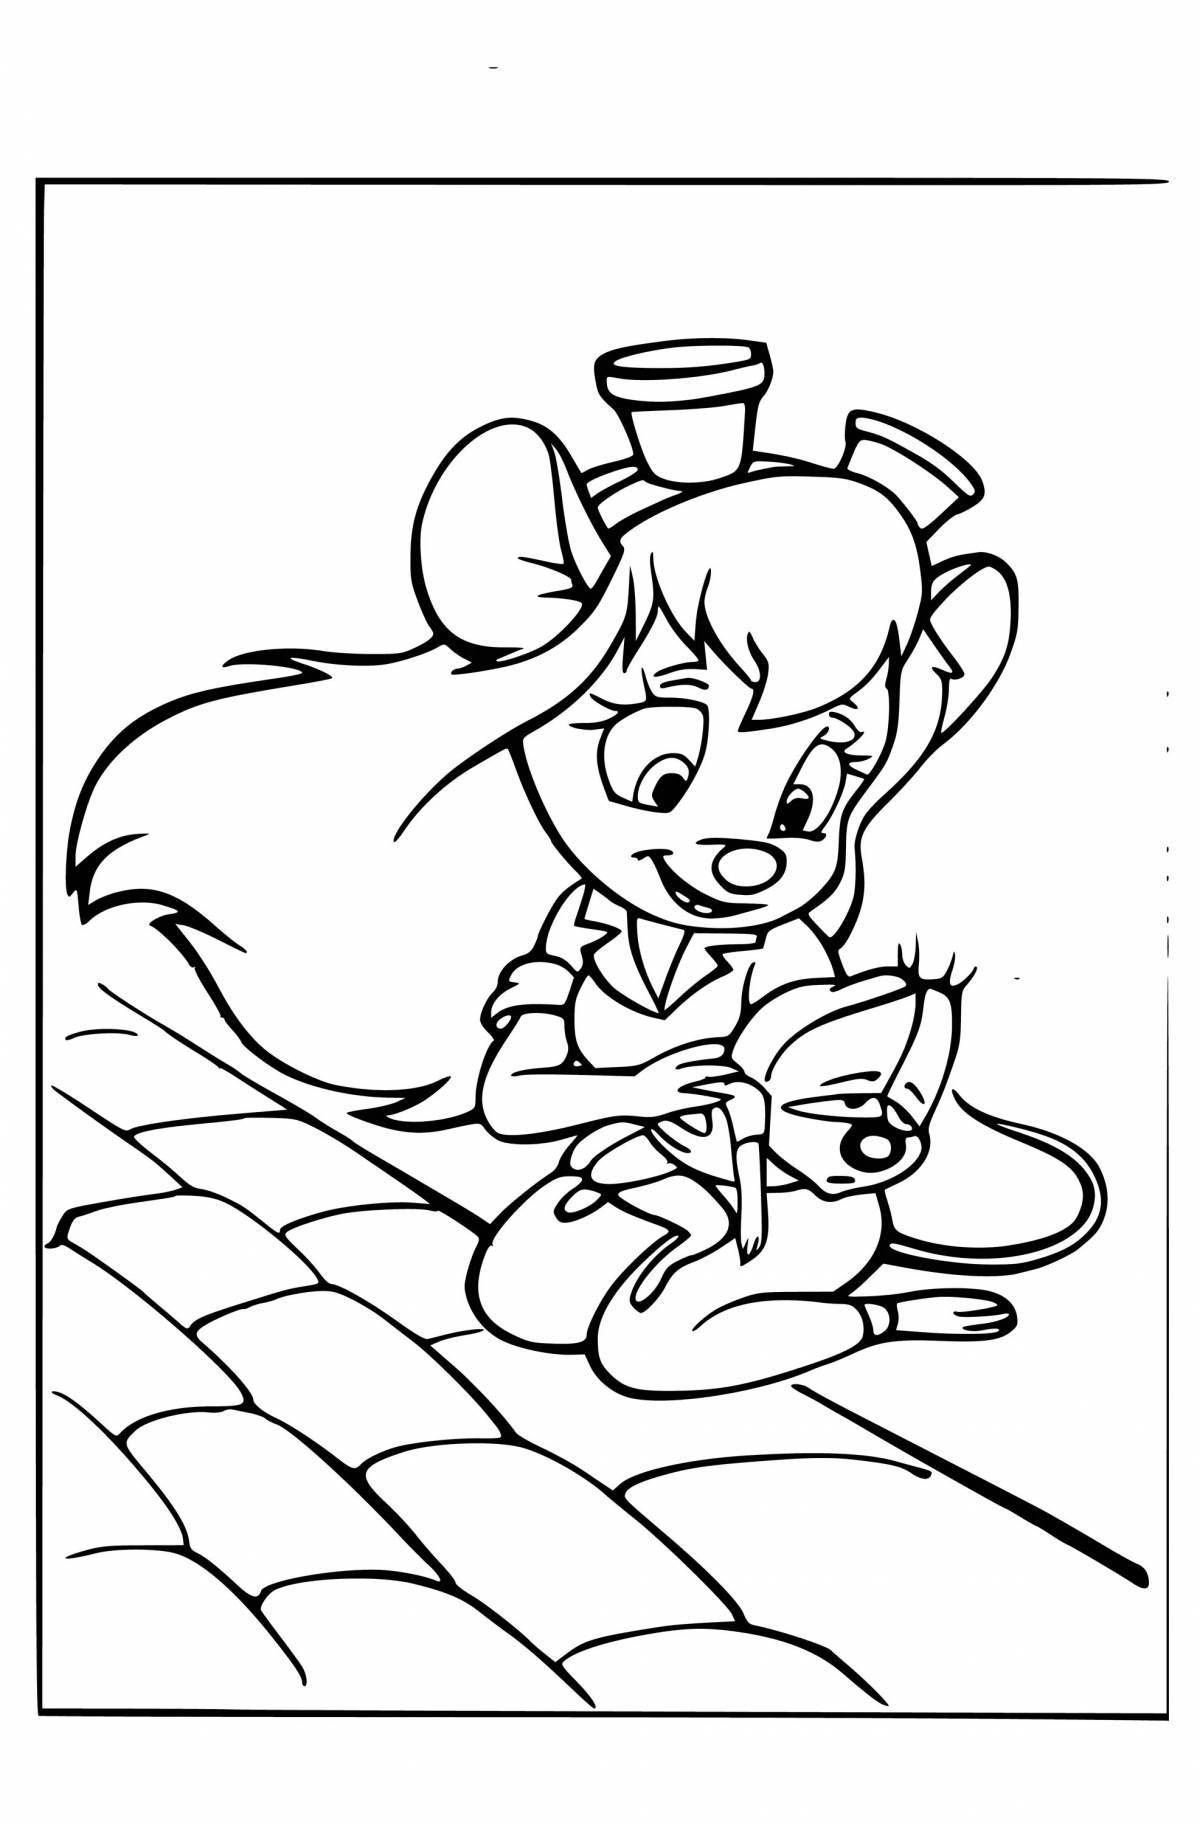 Magic chip and dale save the rangers coloring book